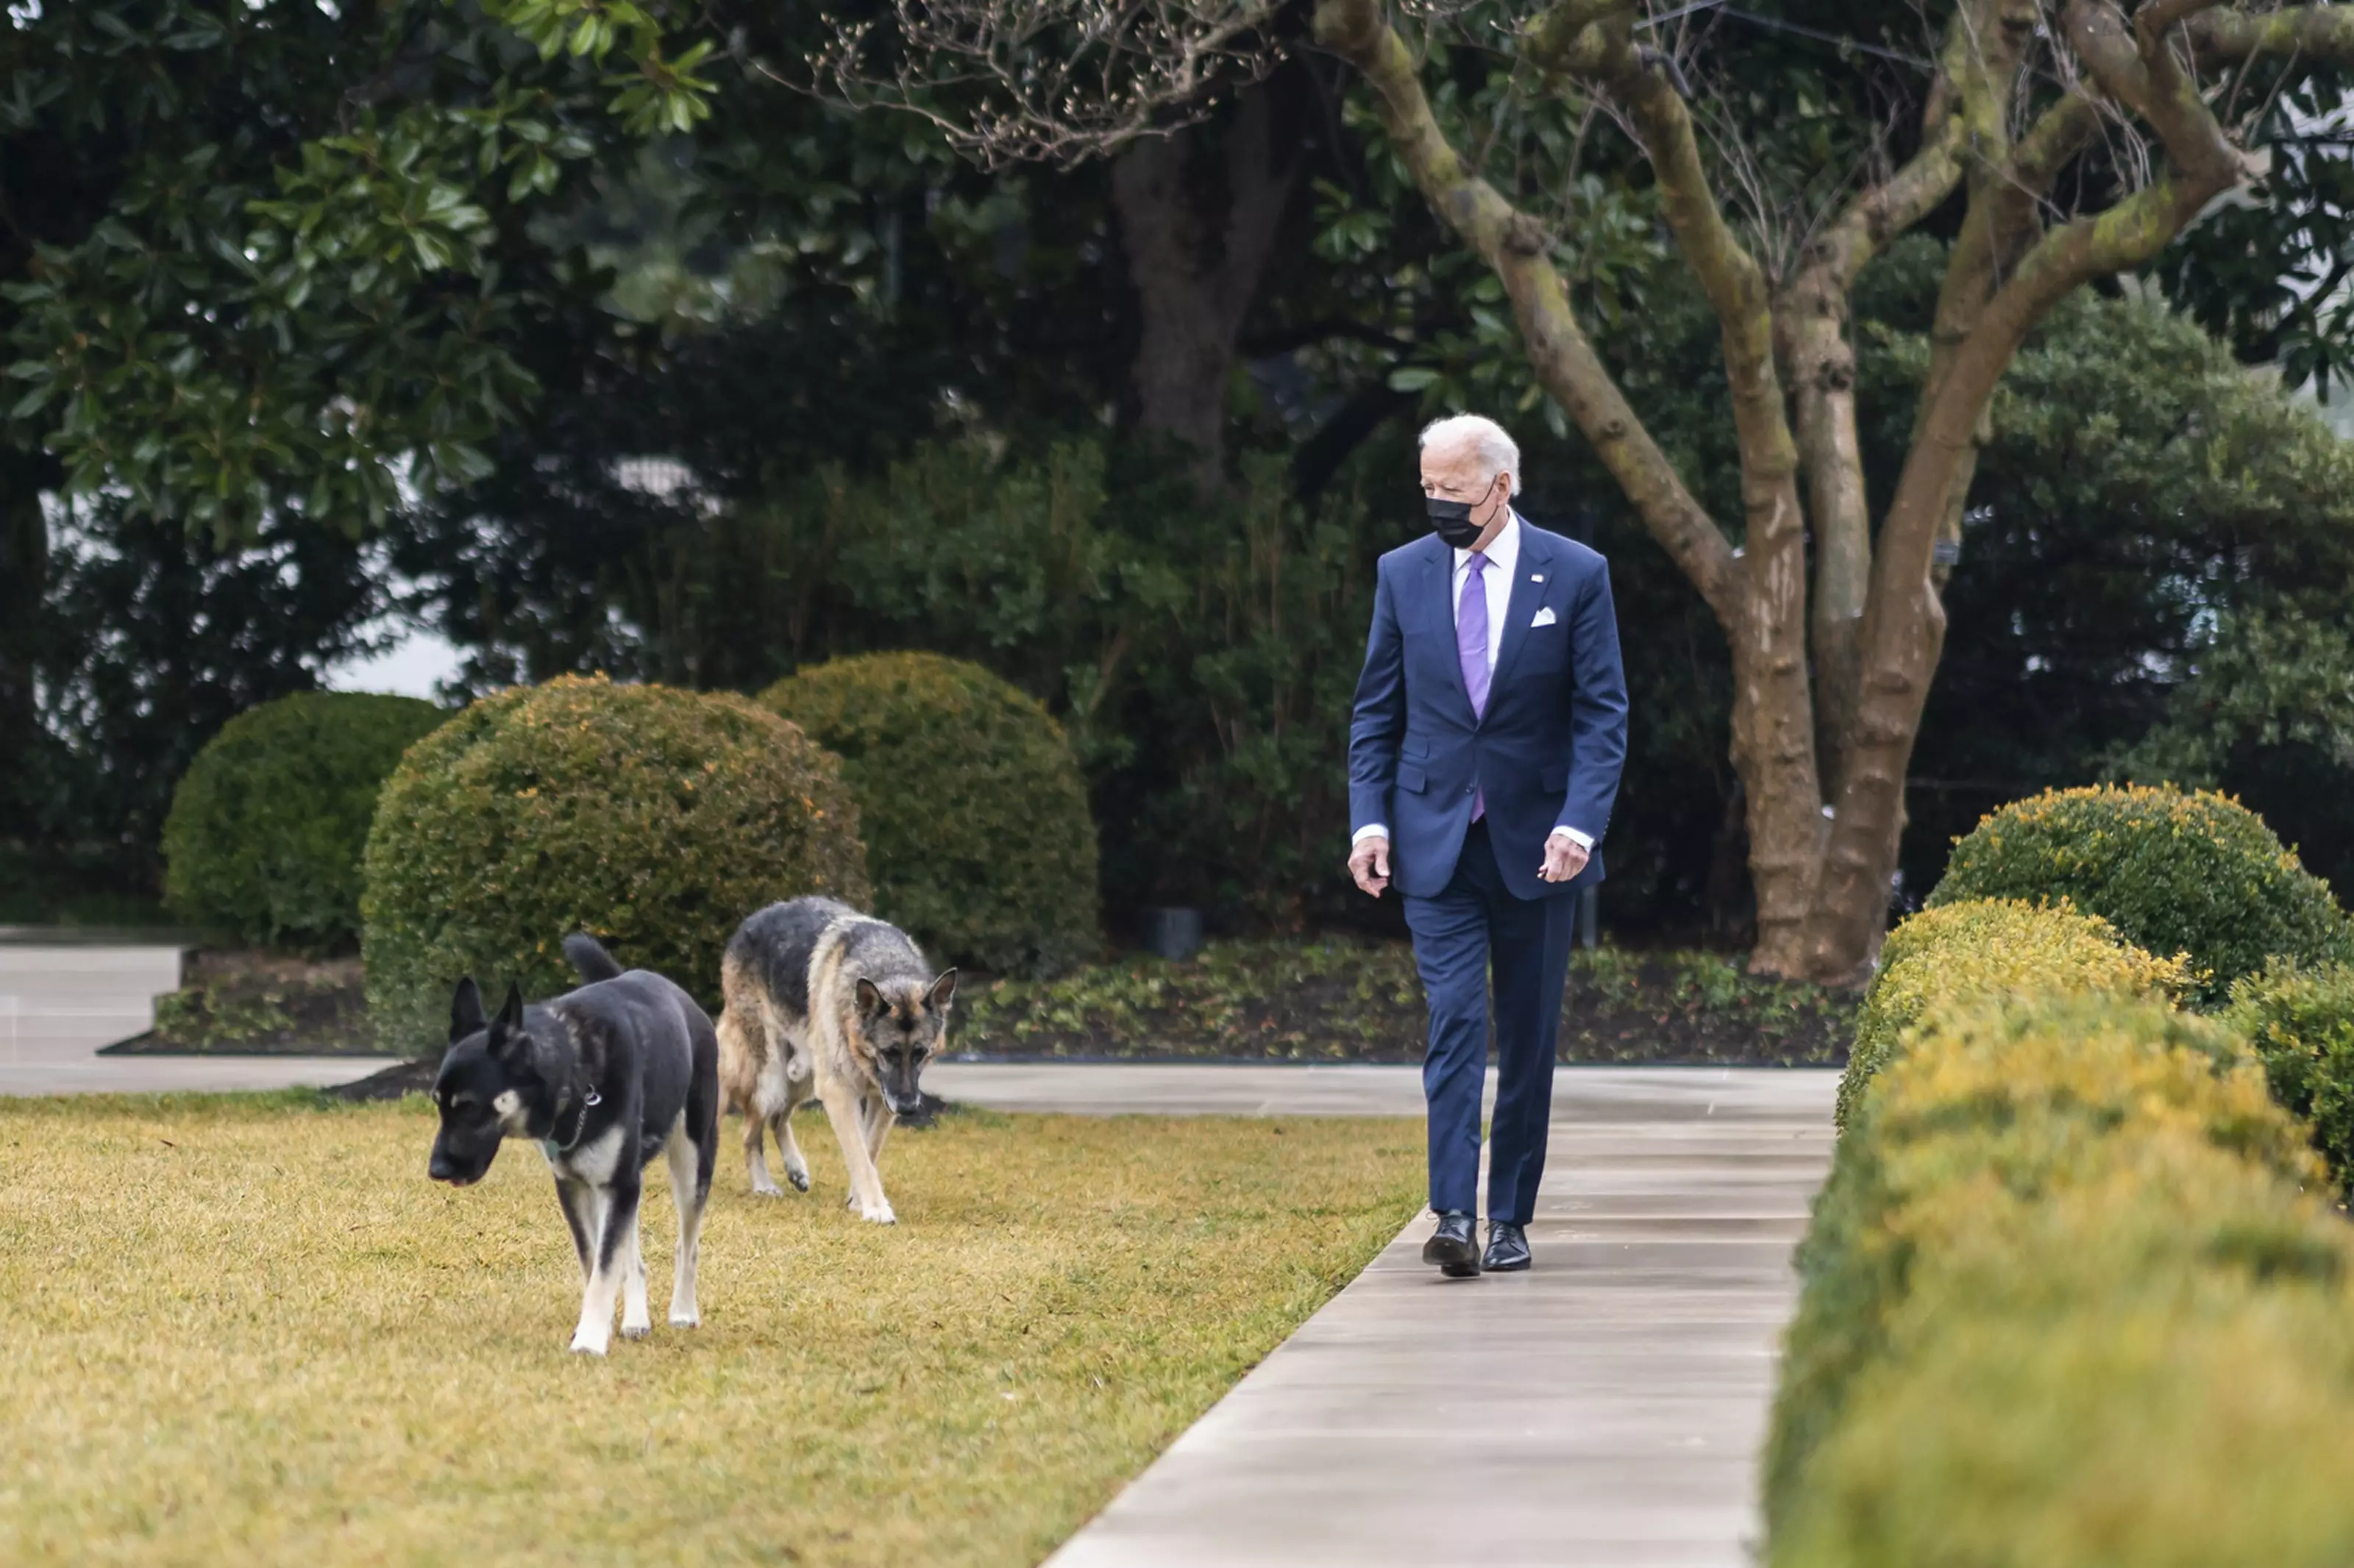 It is not clear if or when the dogs might return to the White House.